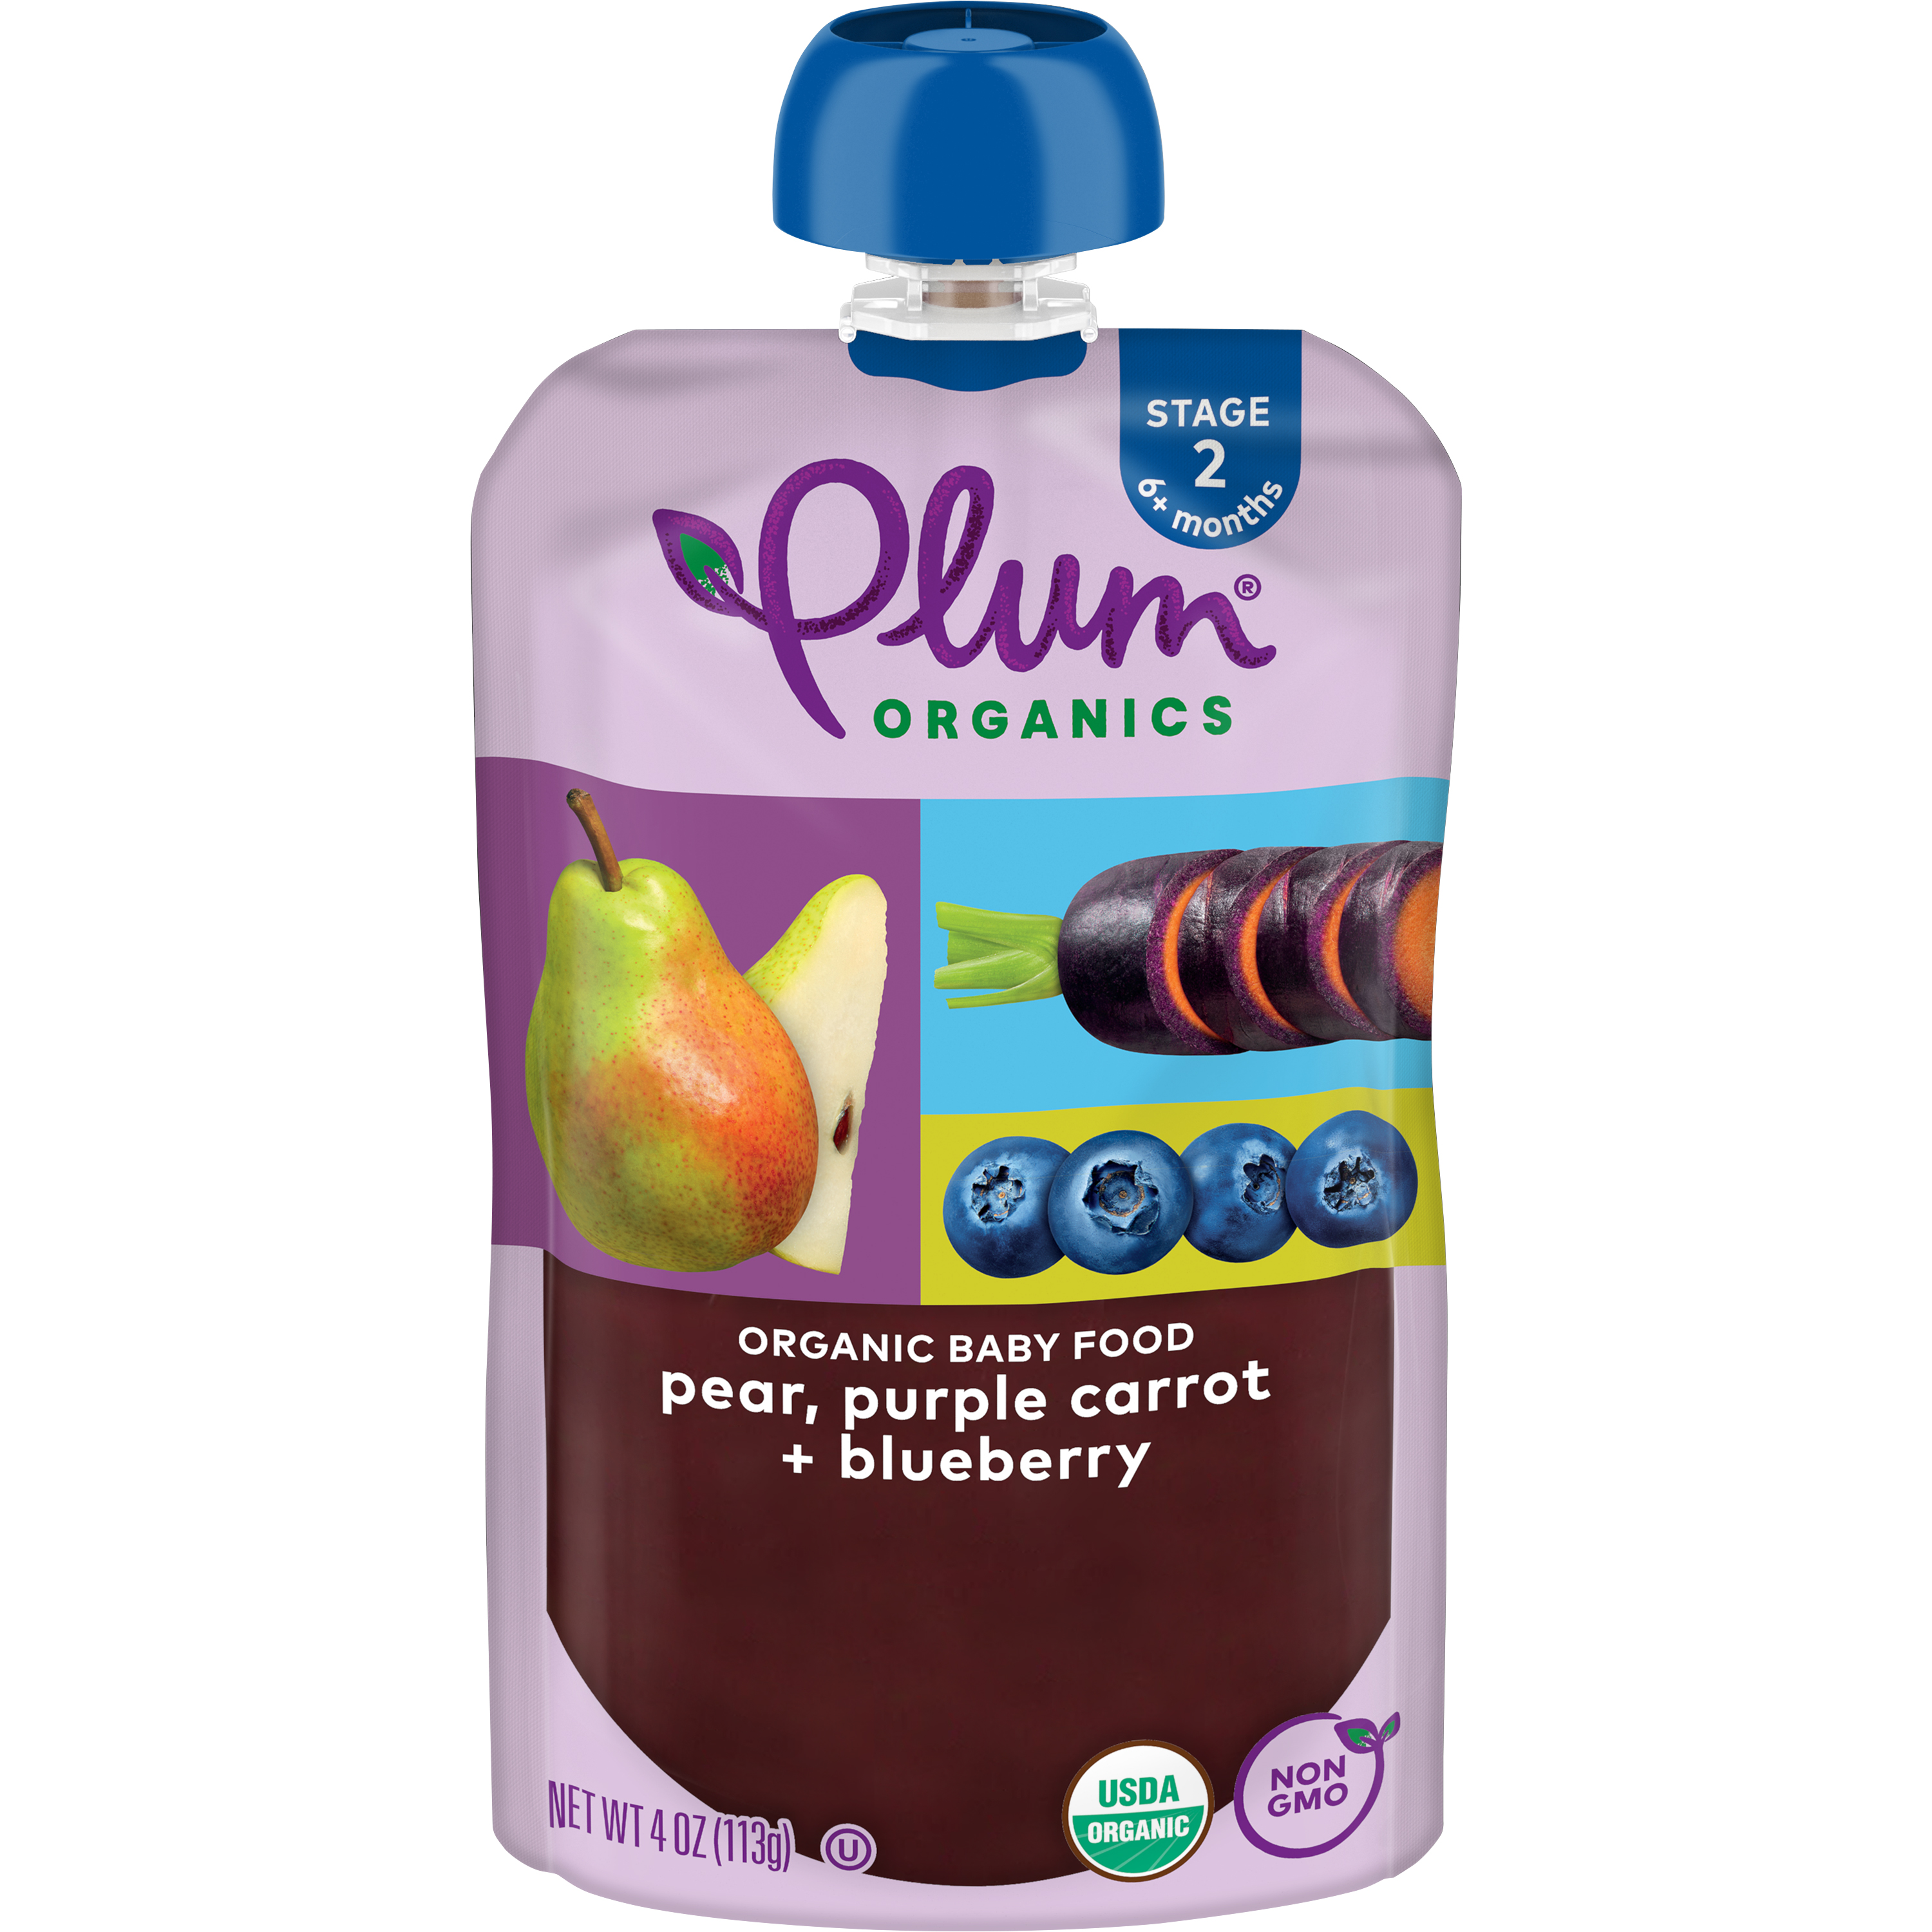 Plum Organics Stage 2 Organic Baby Food Pouches: Pear, Purple Carrot, Blueberry - 4 oz, 6 Pack - image 2 of 9